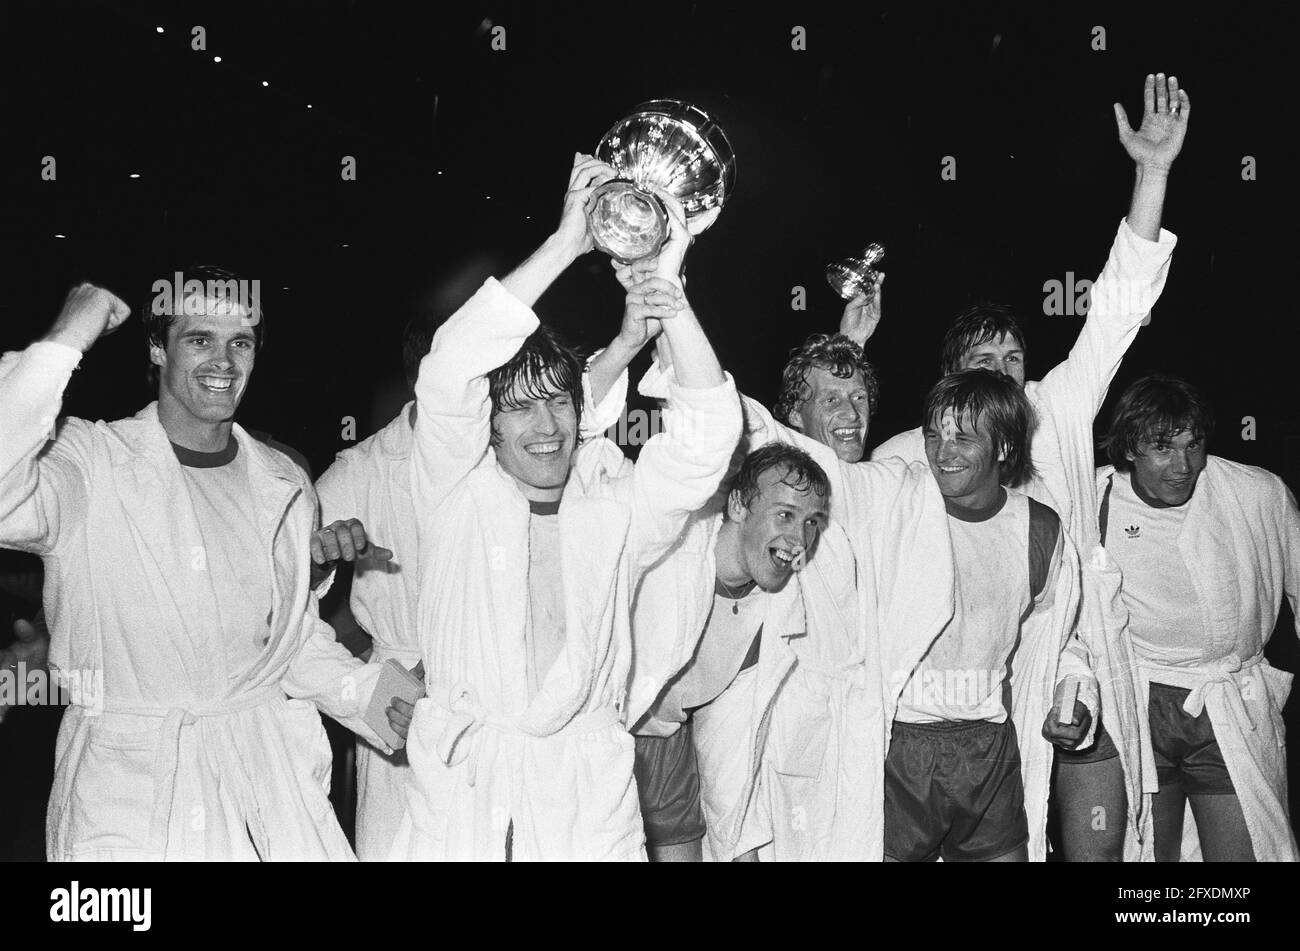 KNVB cup final Ajax against AZ67 0-1, with cup from left to right Metgod, Arnzt, Van Ursum, Kist, Peters, Nijgaard and Verheyen, 5 May 1978, sport, soccer, The Netherlands, 20th century press agency photo, news to remember, documentary, historic photography 1945-1990, visual stories, human history of the Twentieth Century, capturing moments in time Stock Photo